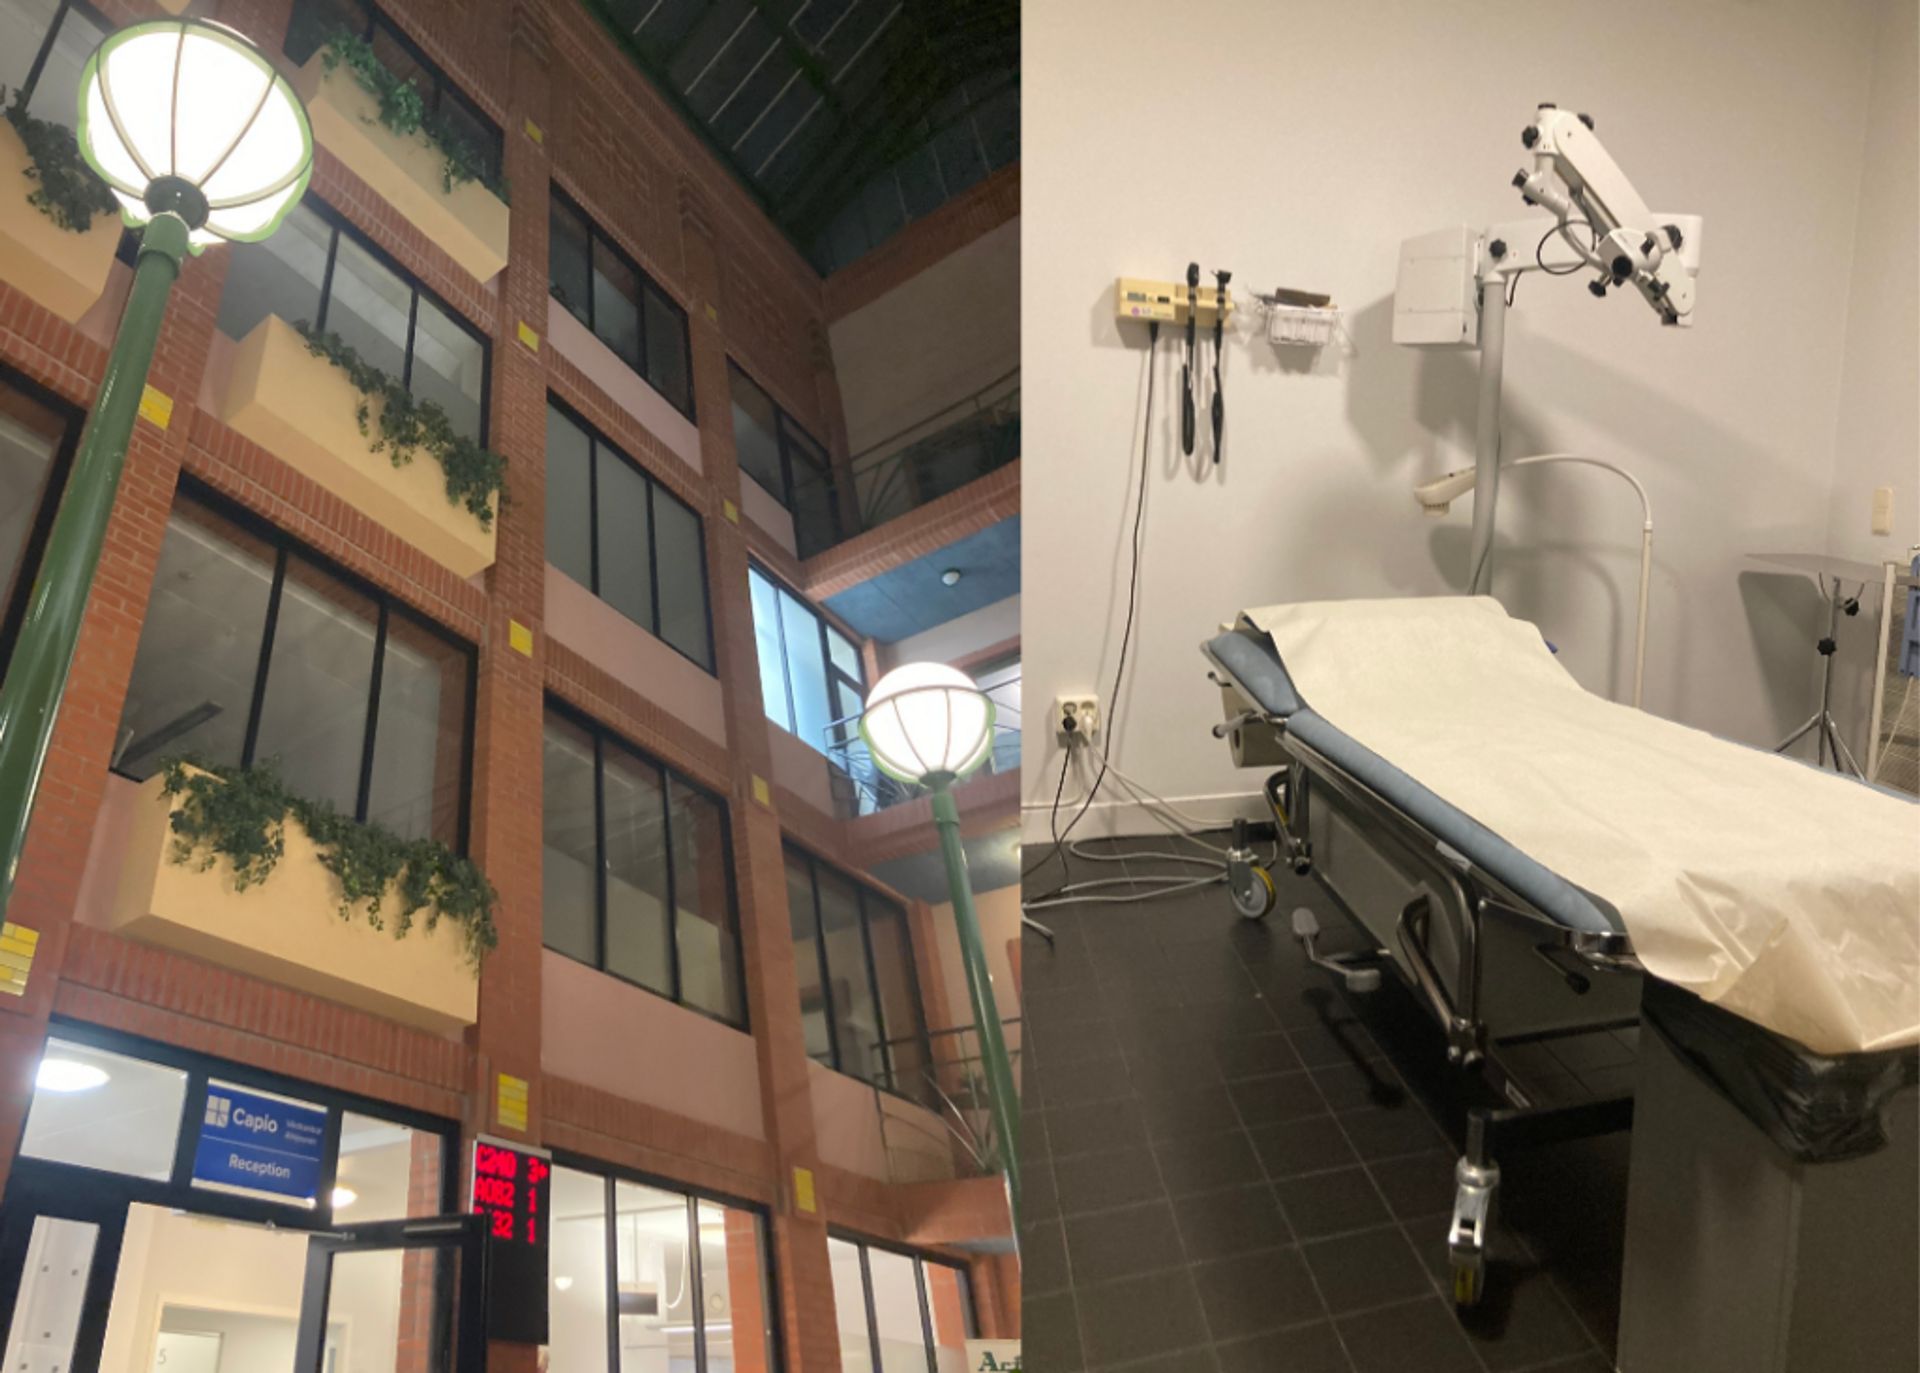 The image is divided into two scenes: on the left, the reception area for an urgent care centre in Sweden; on the right, a medical examination room with an adjustable bed, a diagnostic light, and wall-mounted medical instruments.